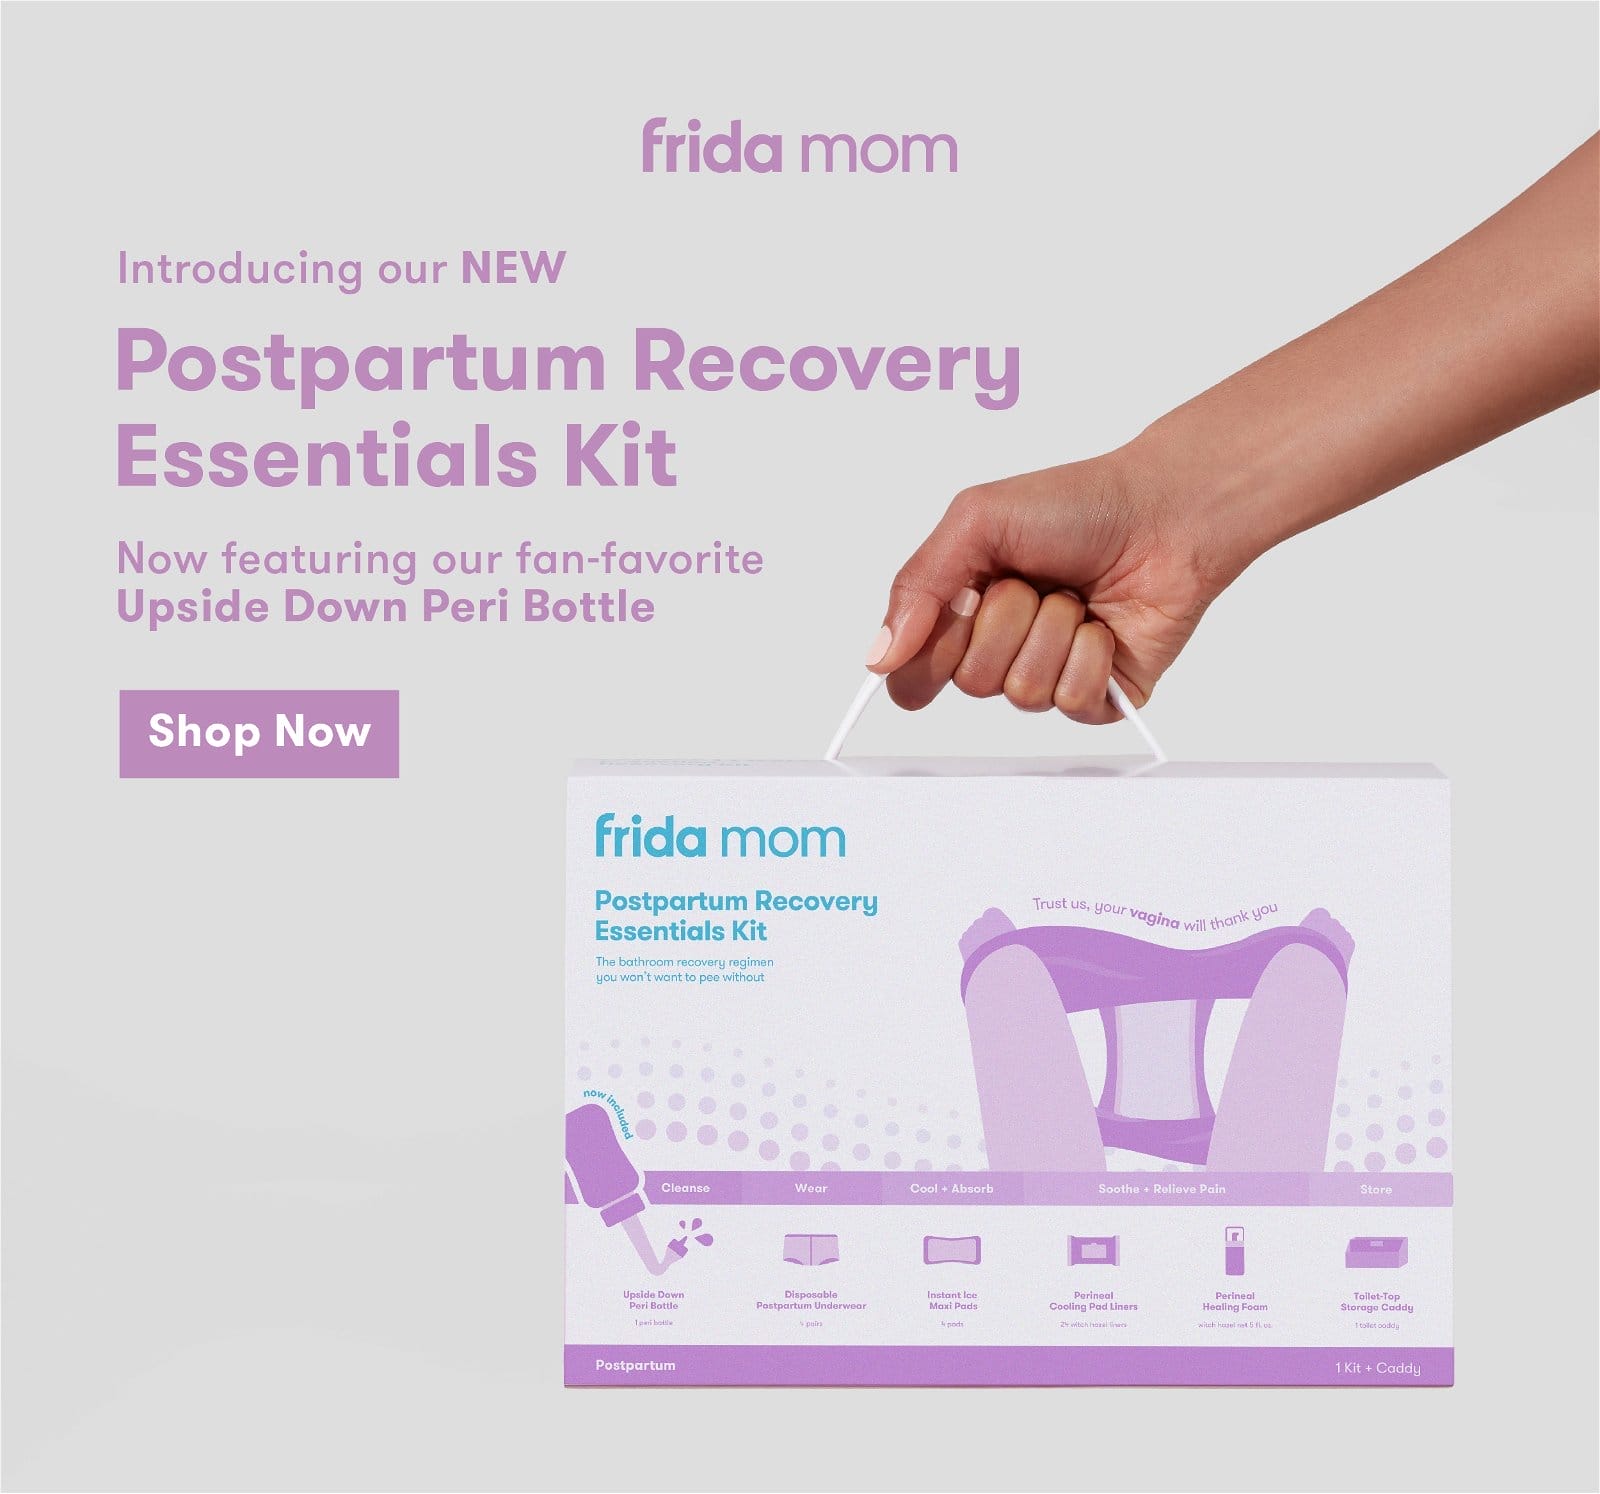 Our NEW Postpartum Recovery Essentials Kit